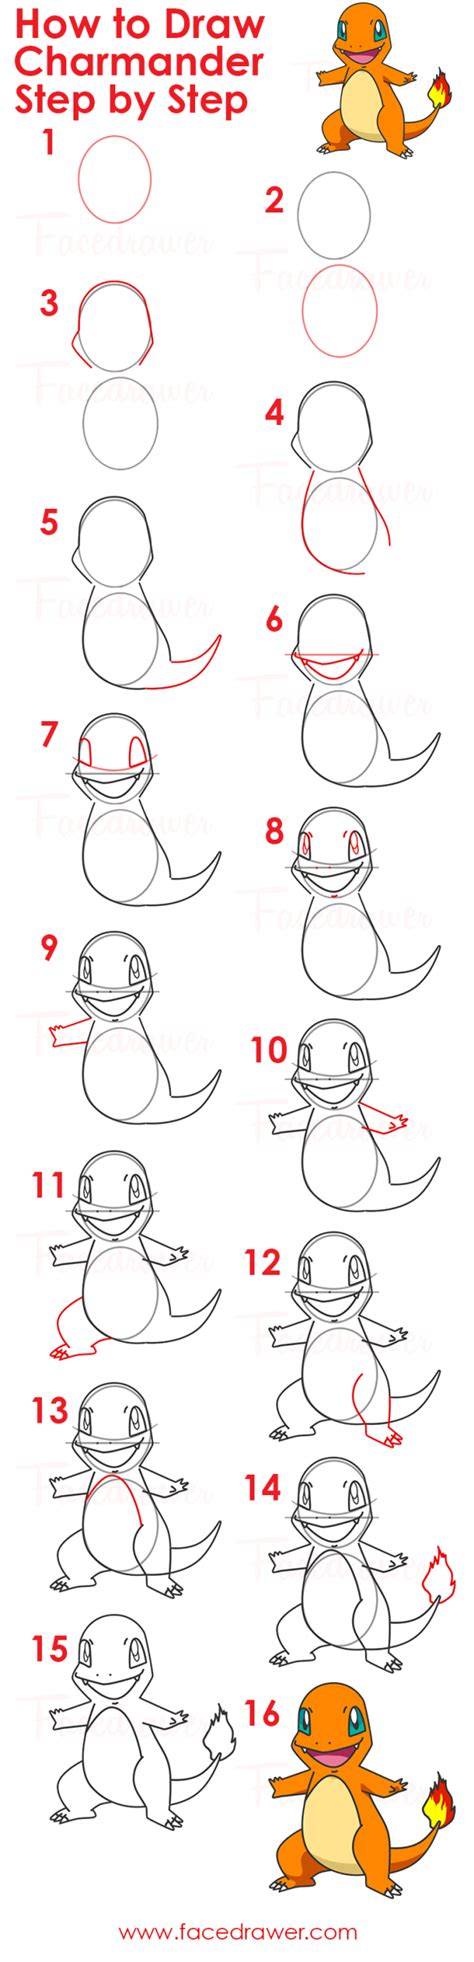 Charmander Step By Step Drawing Lesson Learn How To Draw Pokemon